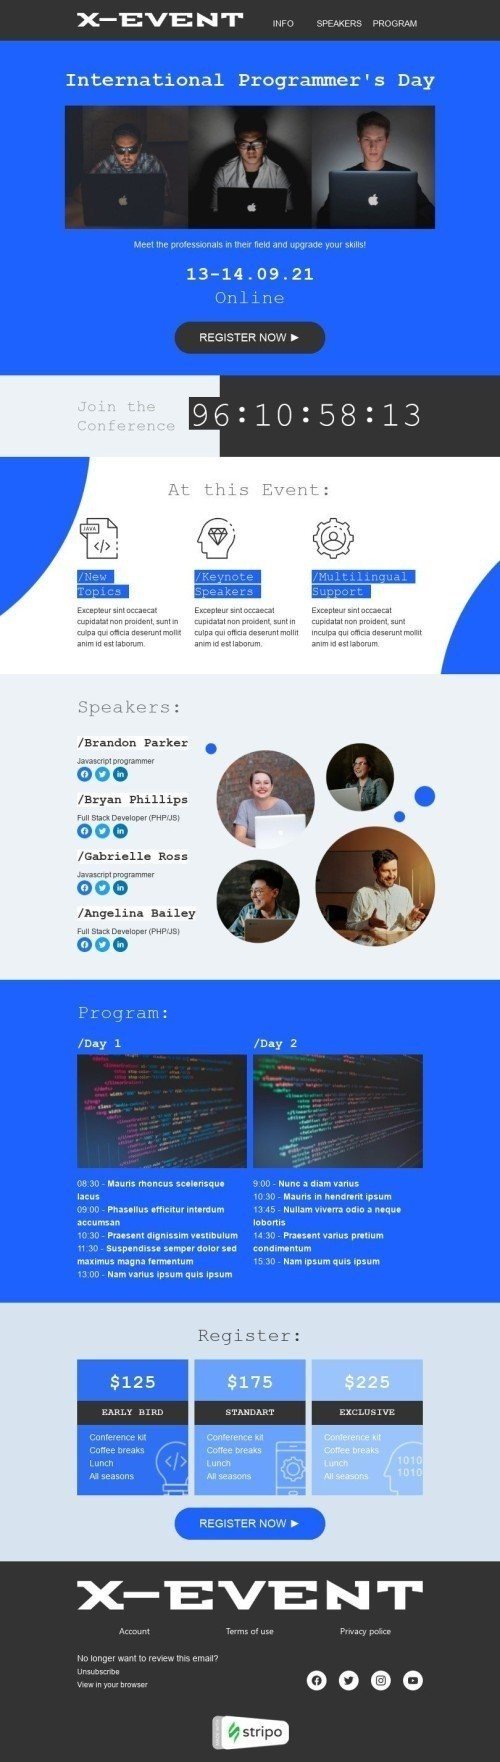 International Programmers' Day Email Template «Upgrade your skills» for Hobbies industry desktop view